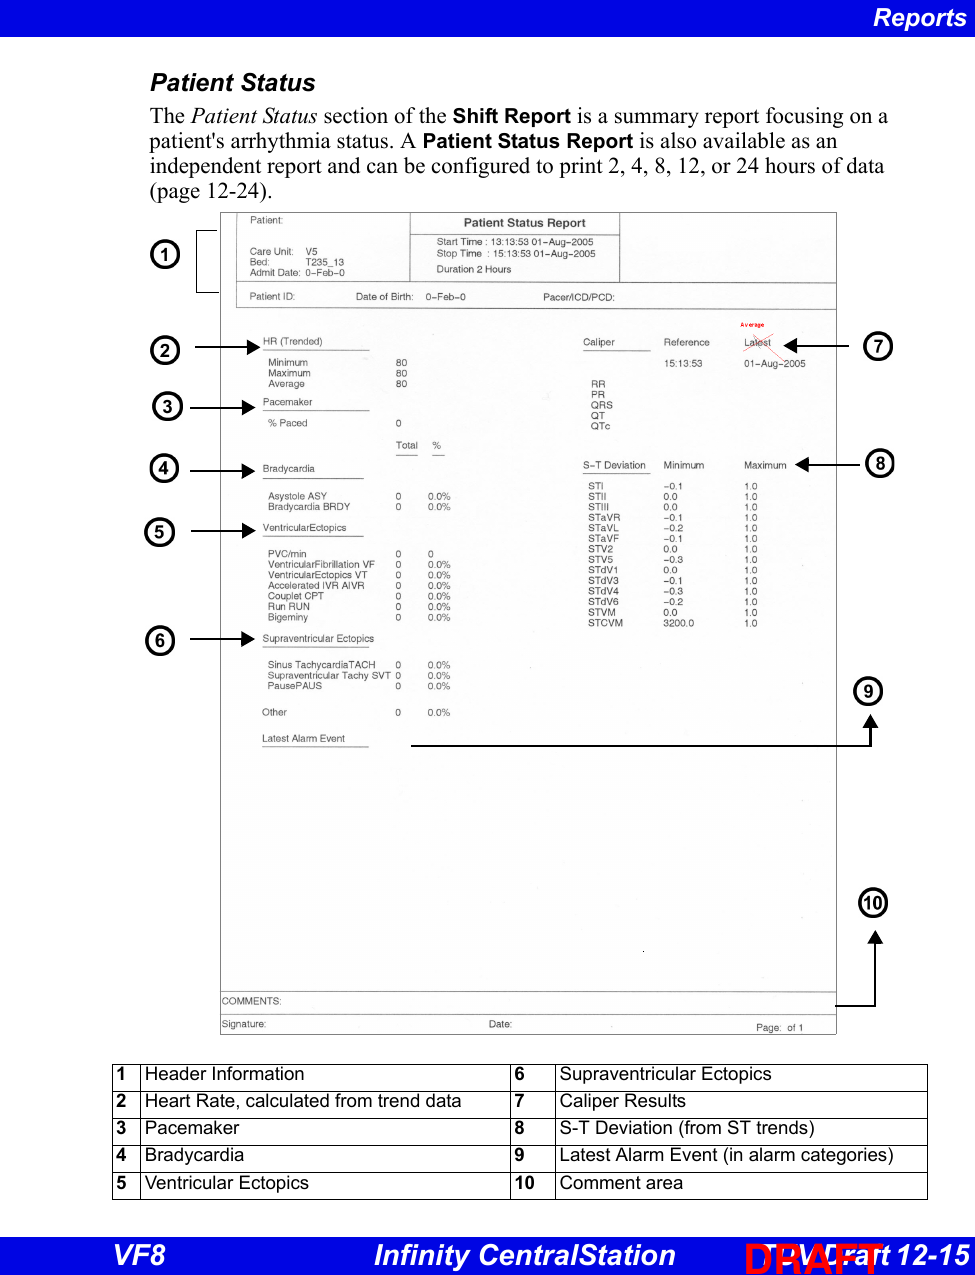 Reports VF8 Infinity CentralStation TUV Draft 12-15 Patient StatusThe Patient Status section of the Shift Report is a summary report focusing on a patient&apos;s arrhythmia status. A Patient Status Report is also available as an independent report and can be configured to print 2, 4, 8, 12, or 24 hours of data (page 12-24). 1Header Information 6Supraventricular Ectopics2Heart Rate, calculated from trend data 7Caliper Results3Pacemaker 8S-T Deviation (from ST trends)4Bradycardia 9Latest Alarm Event (in alarm categories)5Ventricular Ectopics 10 Comment area DRAFT